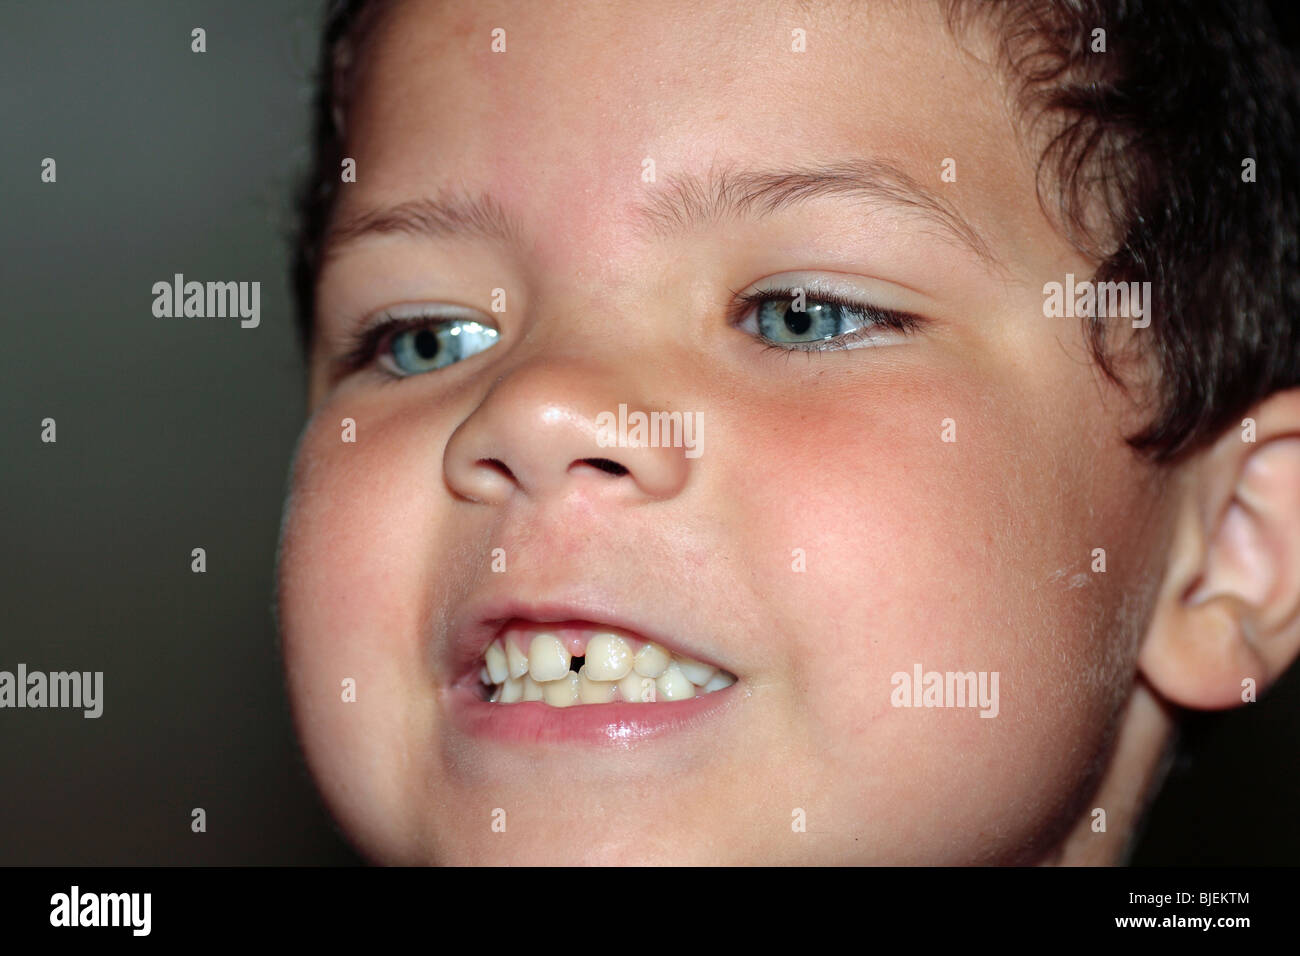 a four year old child boy showing his teeth Stock Photo